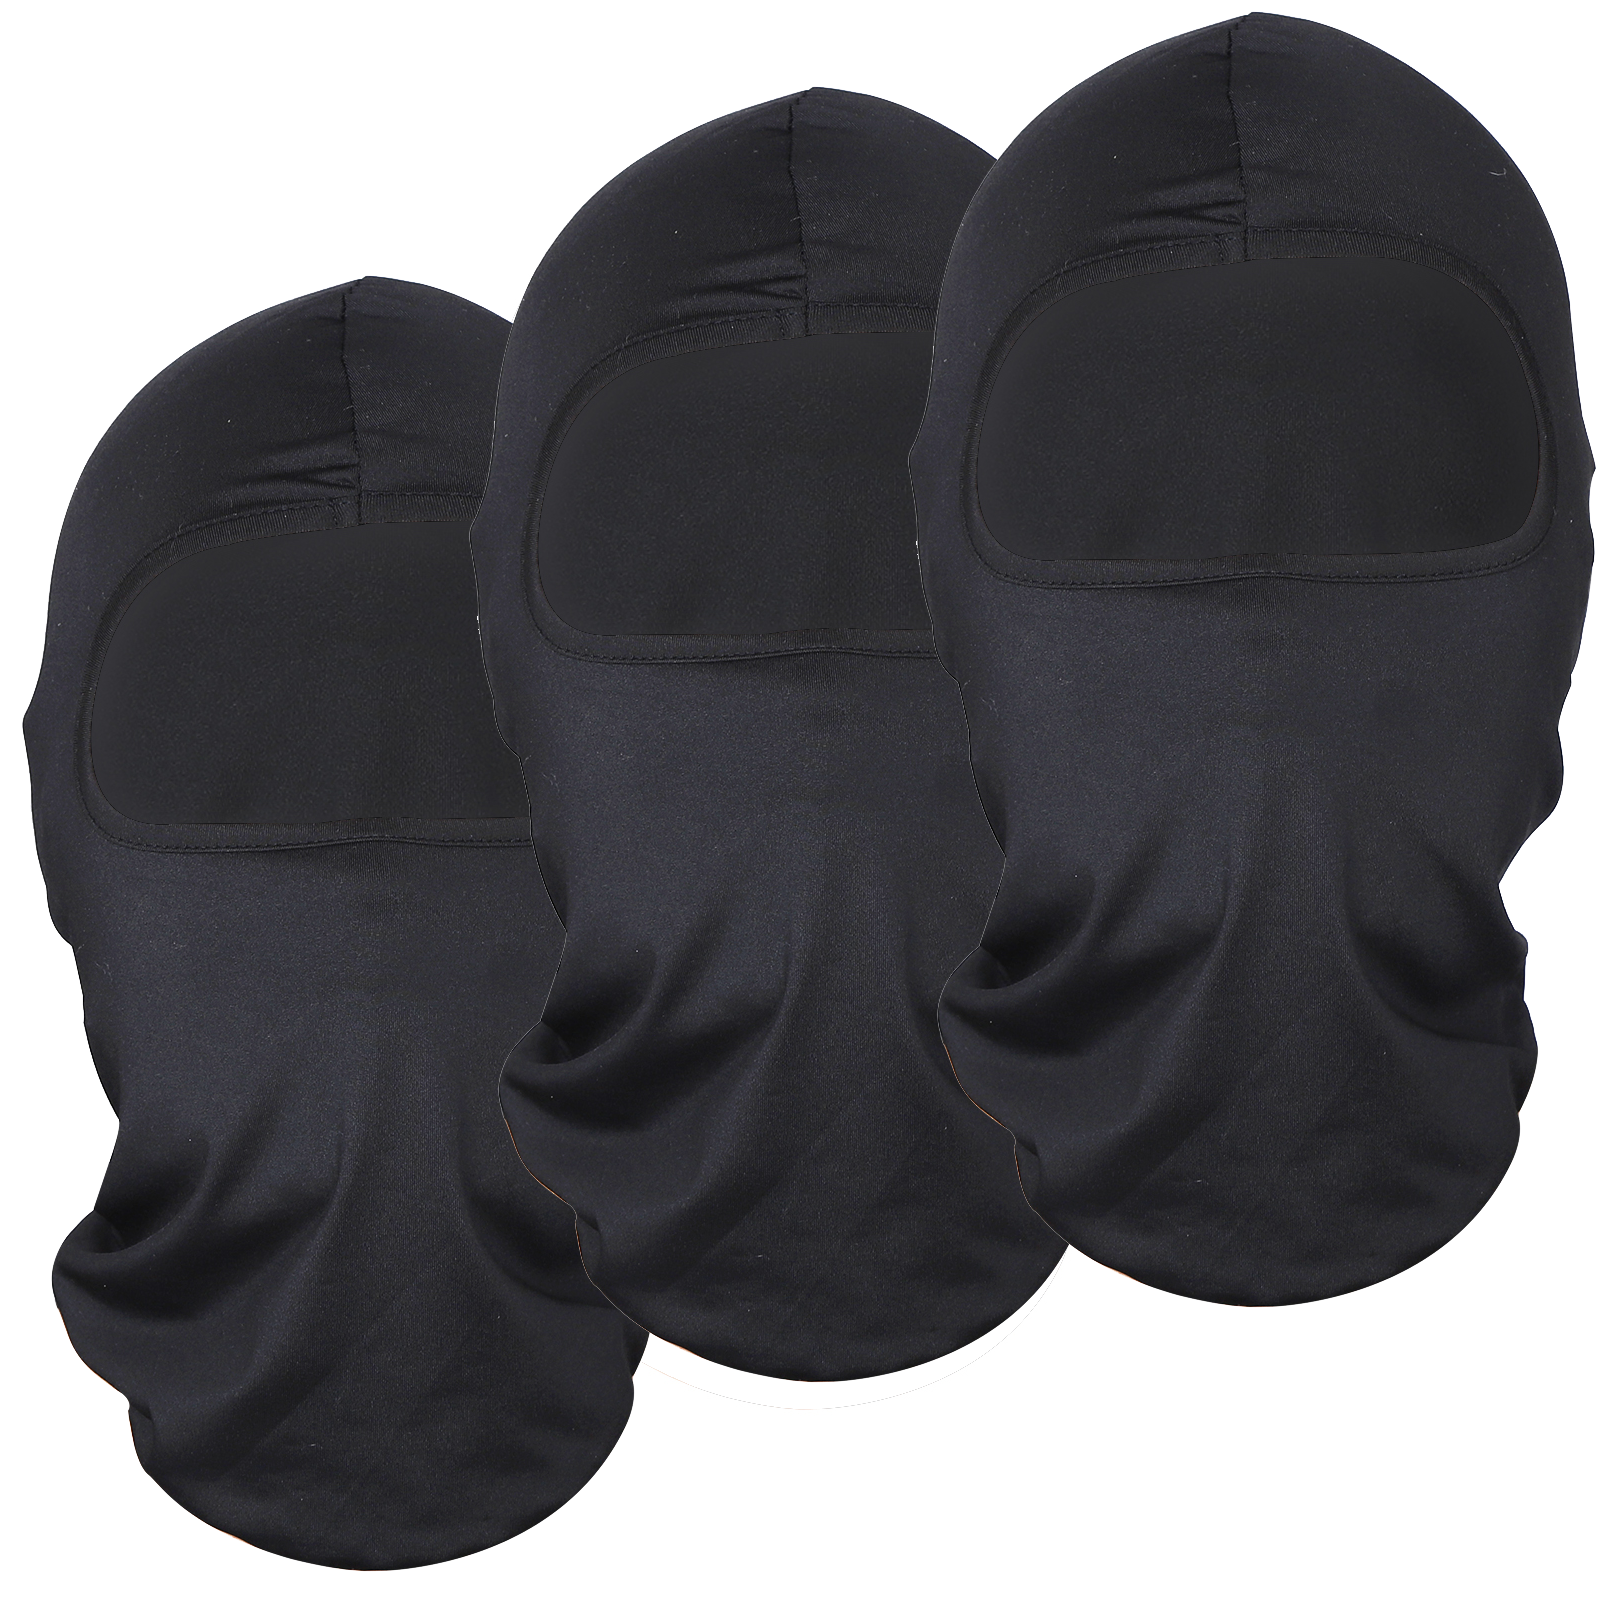  3 Pack Unisex Balaclava Full Face Mask Hat for Outdoor Airsoft Motorcycle Ski  Unbranded